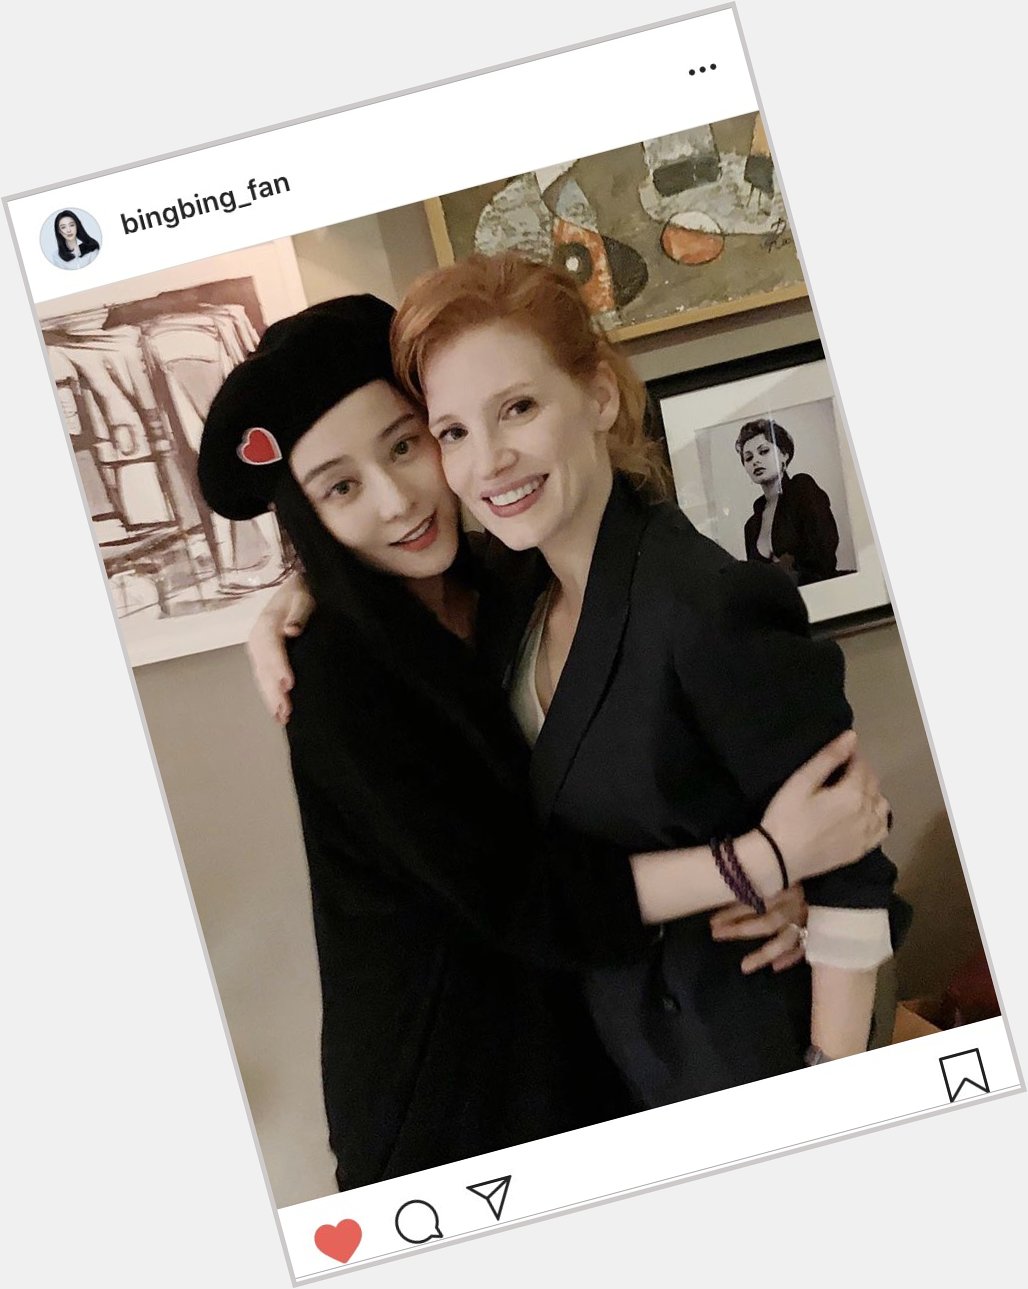 Fan Bingbing s new IG post and story. Wishing Jessica Chastain a happy birthday. 